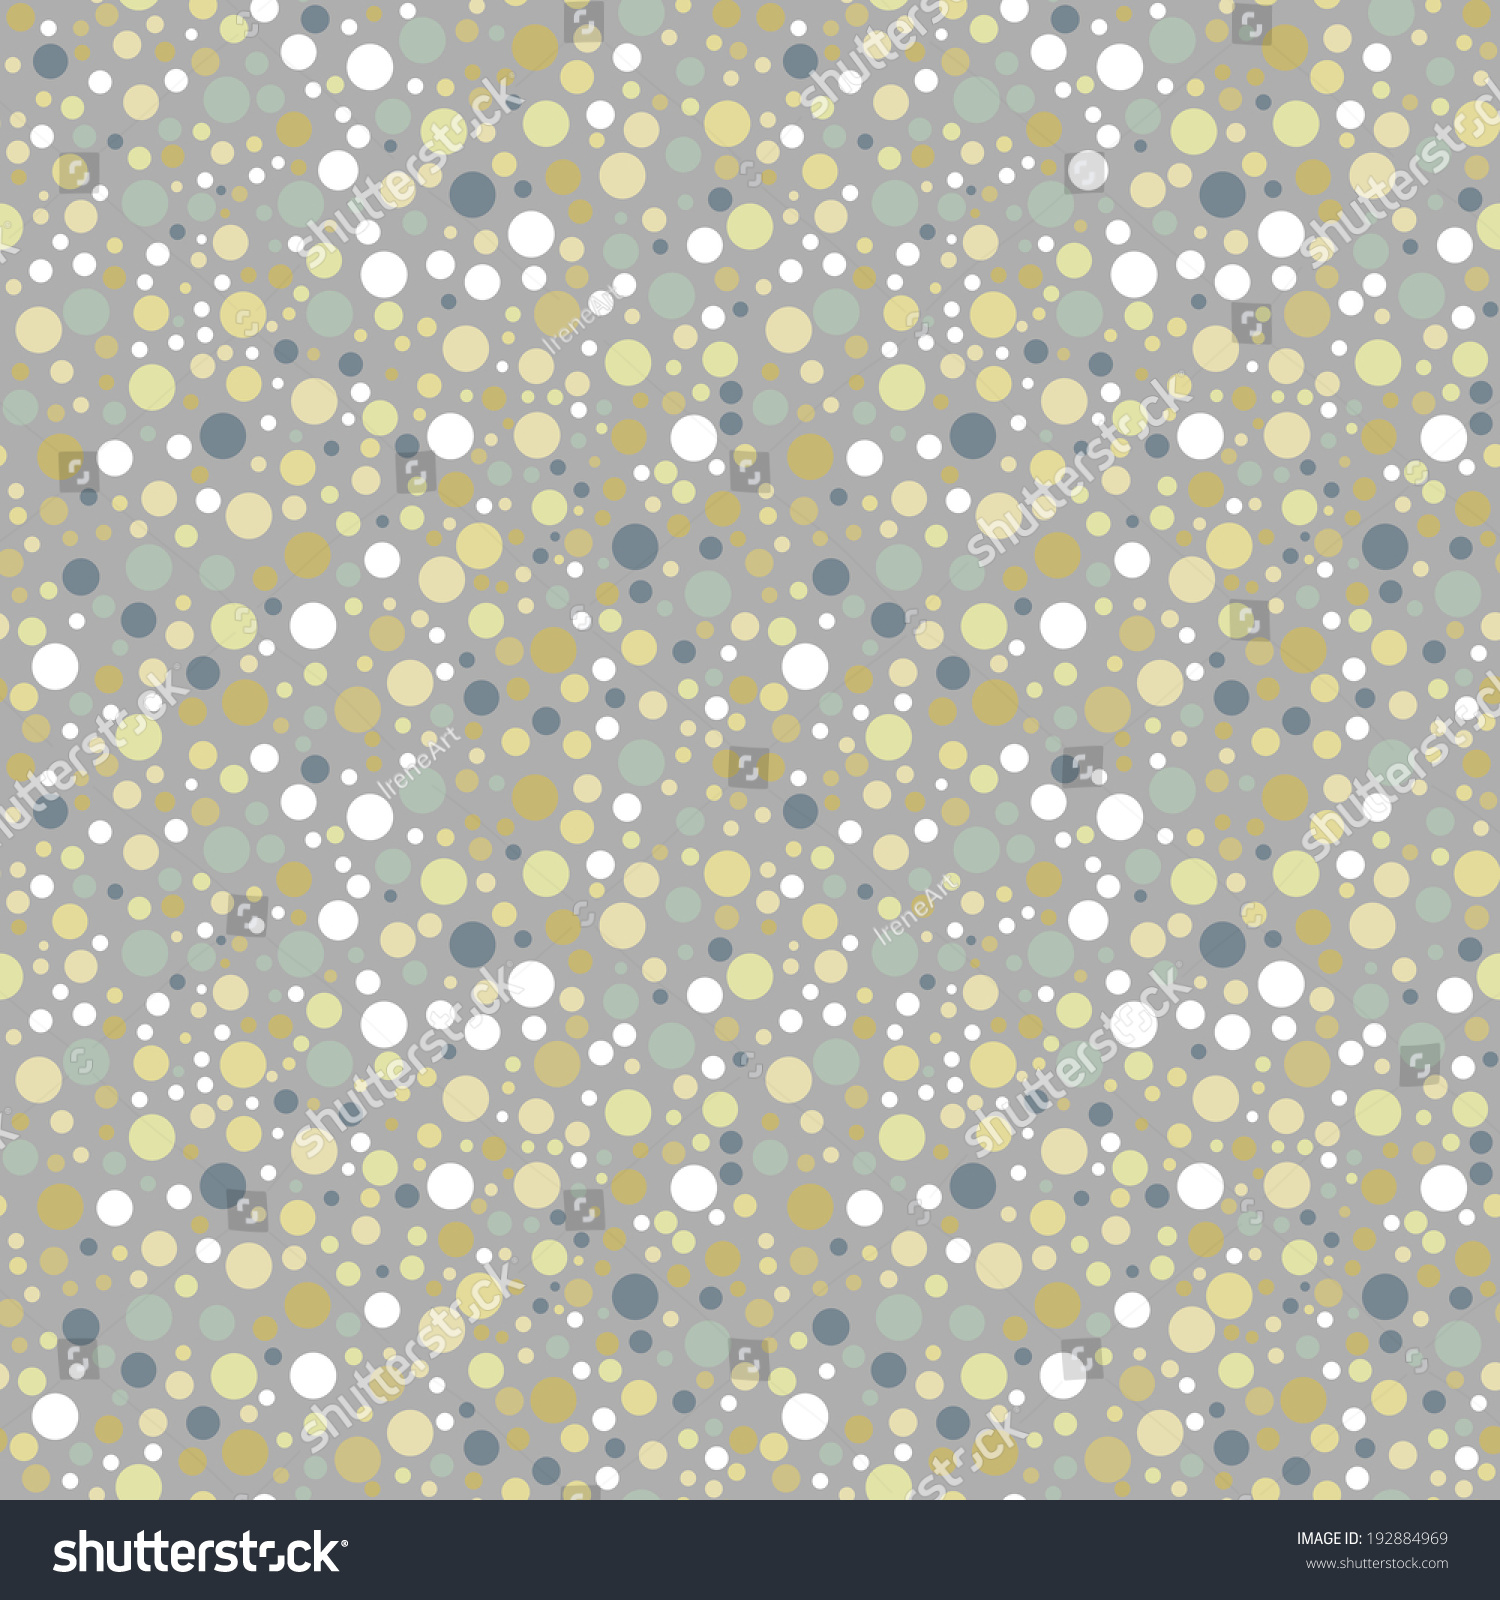 Colorful Polka Dot Seamless Pattern. Abstract Background Stock Photo